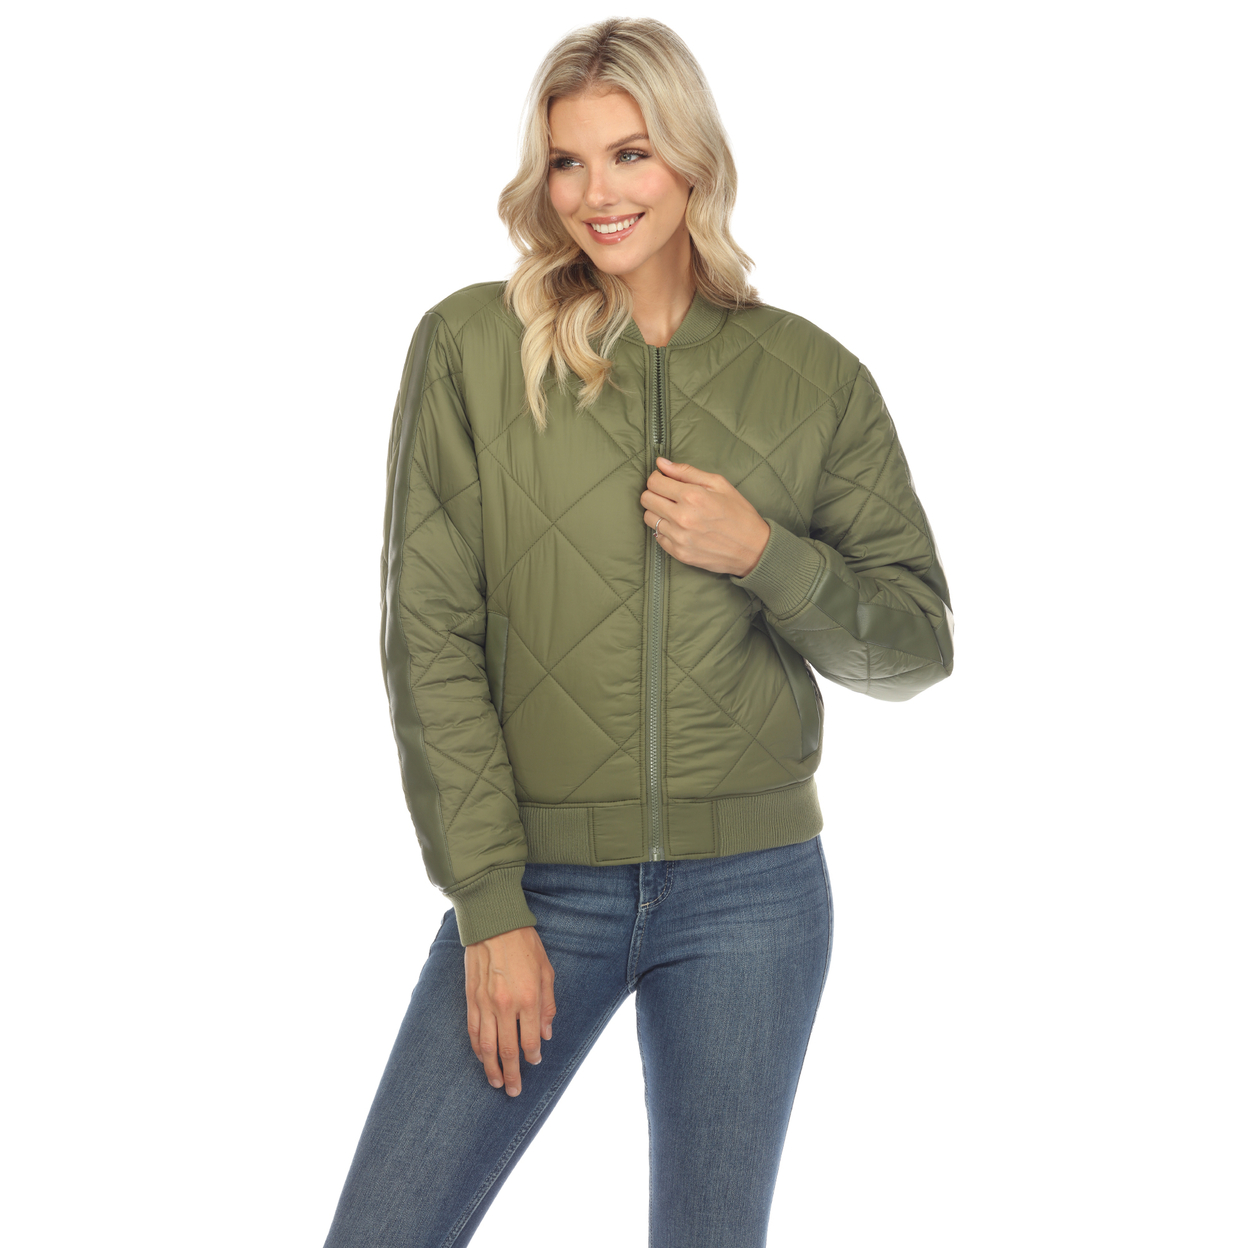 White Mark Women's Quilted Puffer Bomber Jacket - Olive, 3x